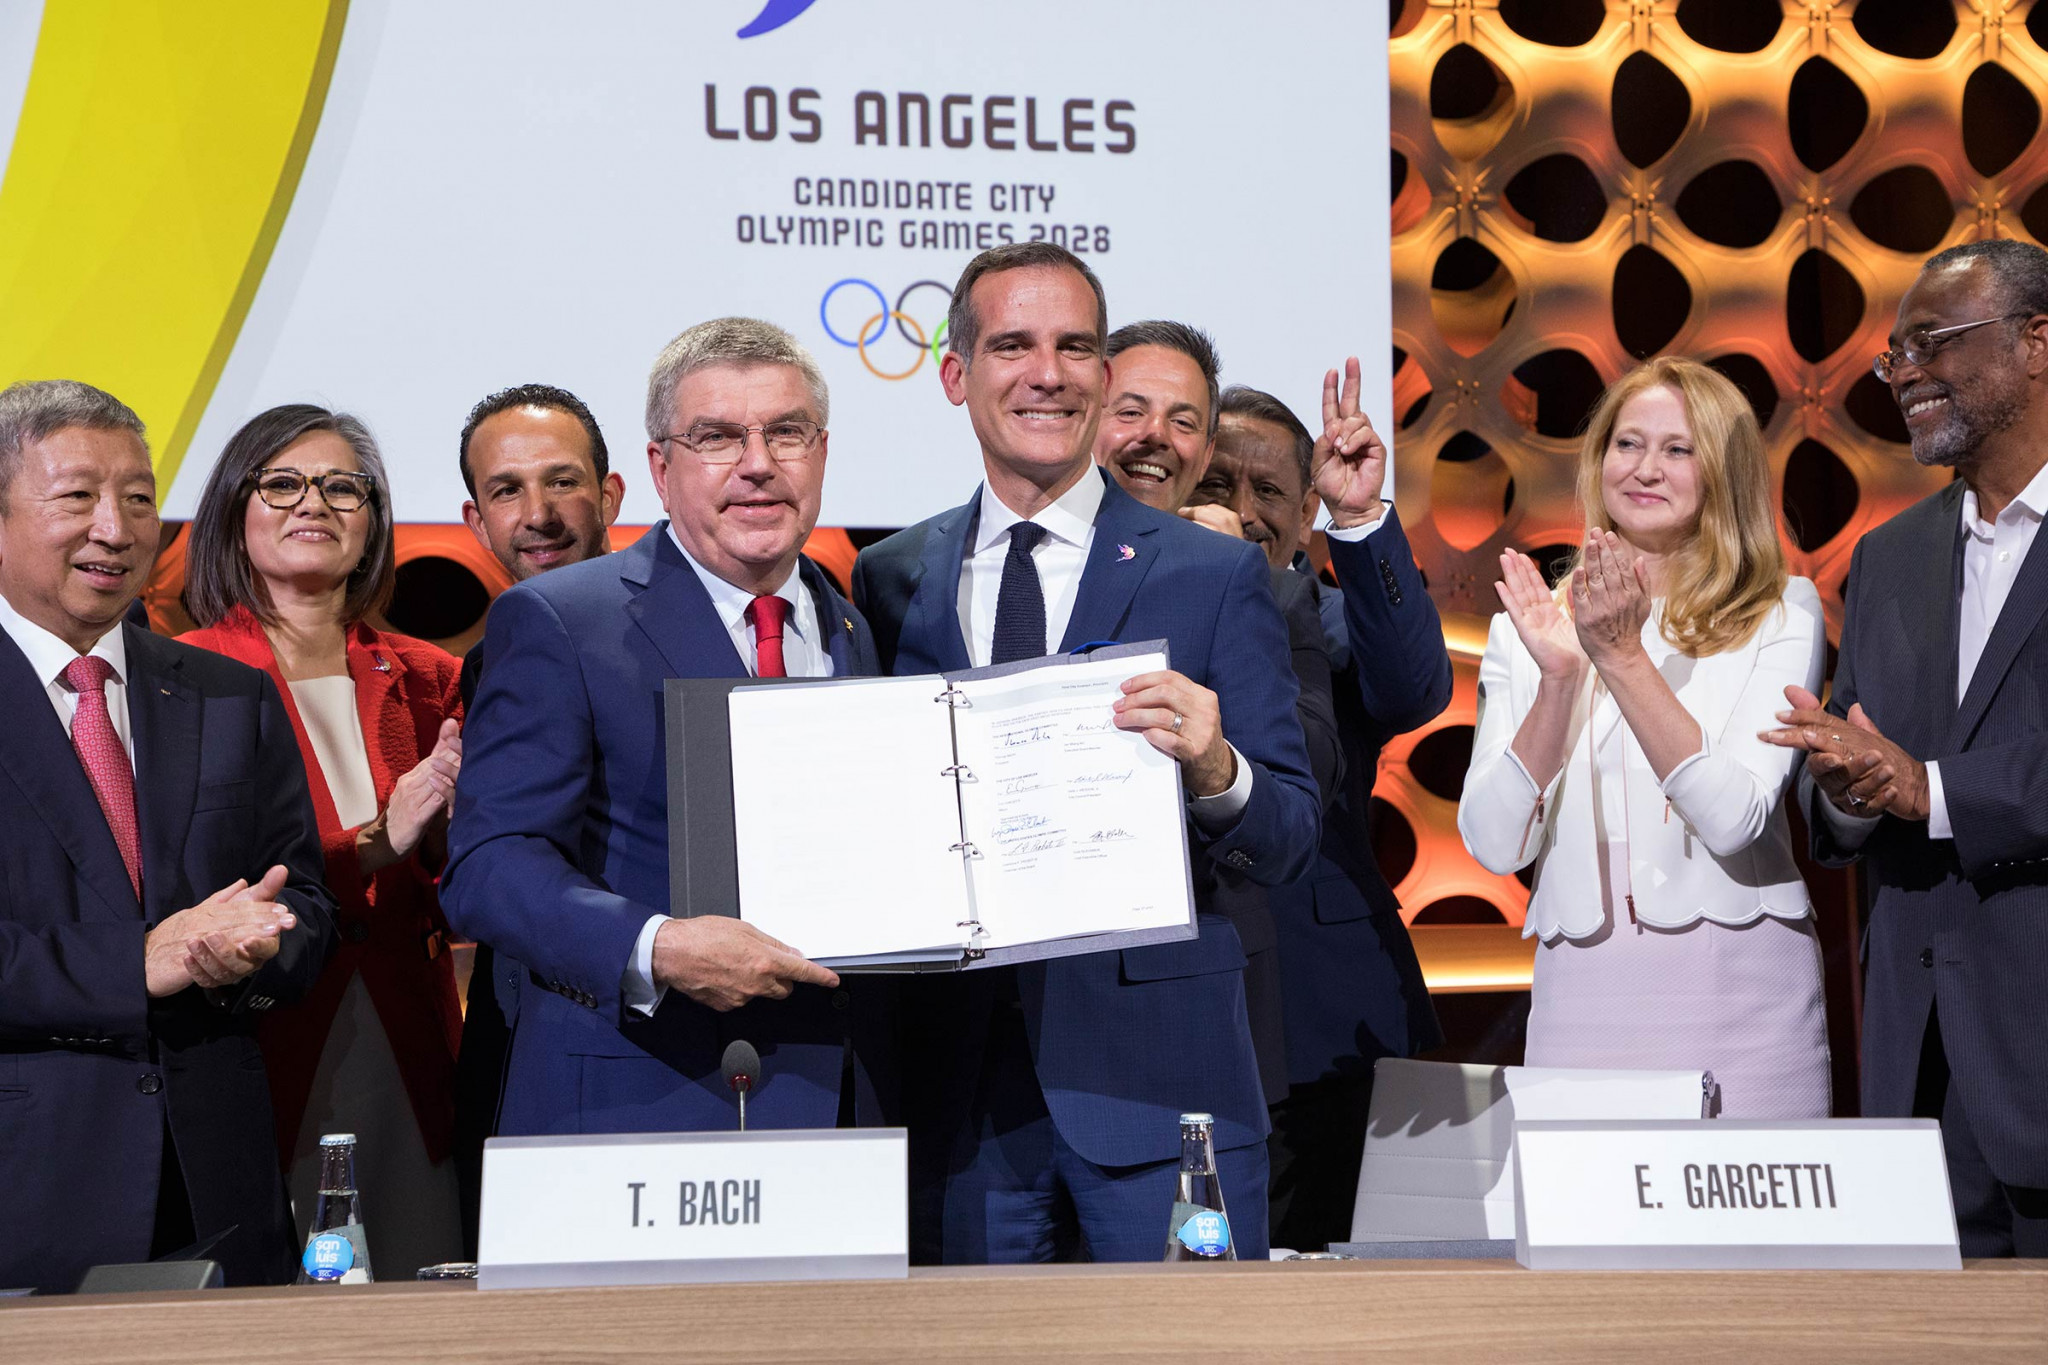 A labour union is seeking details of the Games Agreement signed between Los Angeles 2028 and the City of Los Angeles ©Getty Images